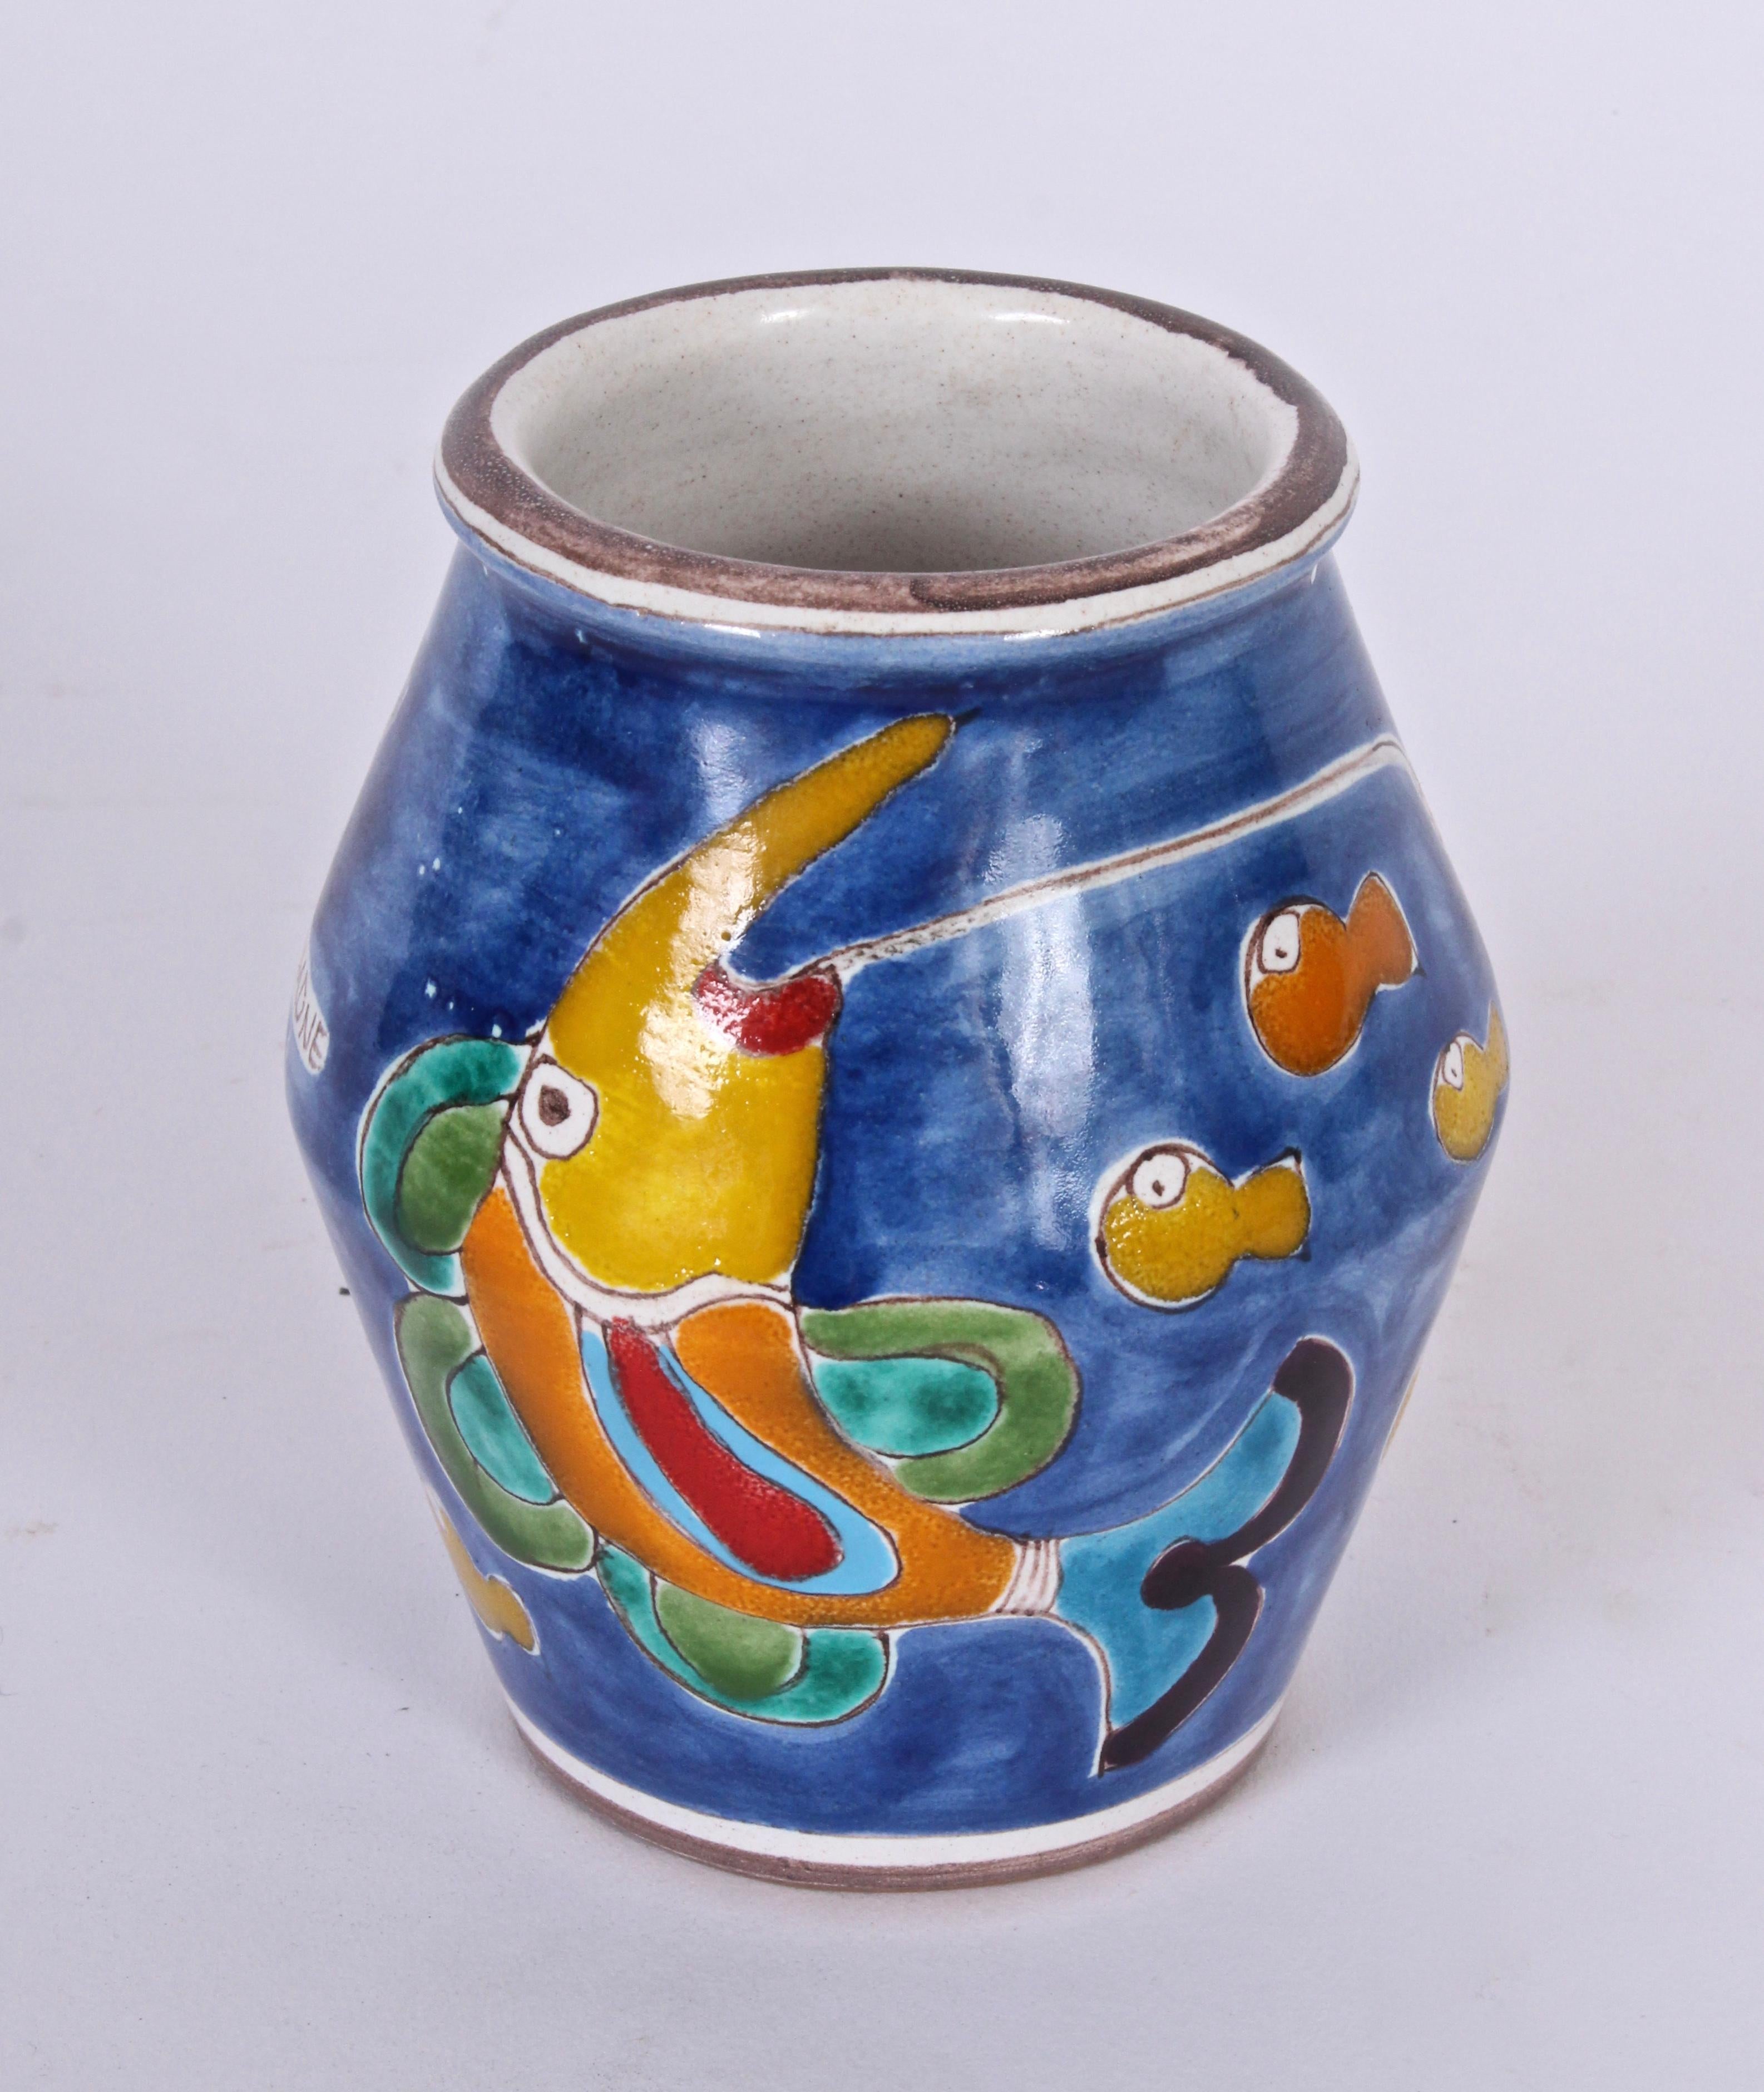 Early, signed Giovanni DeSimone for Vietri hand-painted faience Italian vase. The painted scene depicts a capped man in boat with an underwater world populated by colorful fish. With blue, green, red, orange and yellow coloration. Mediterranean.